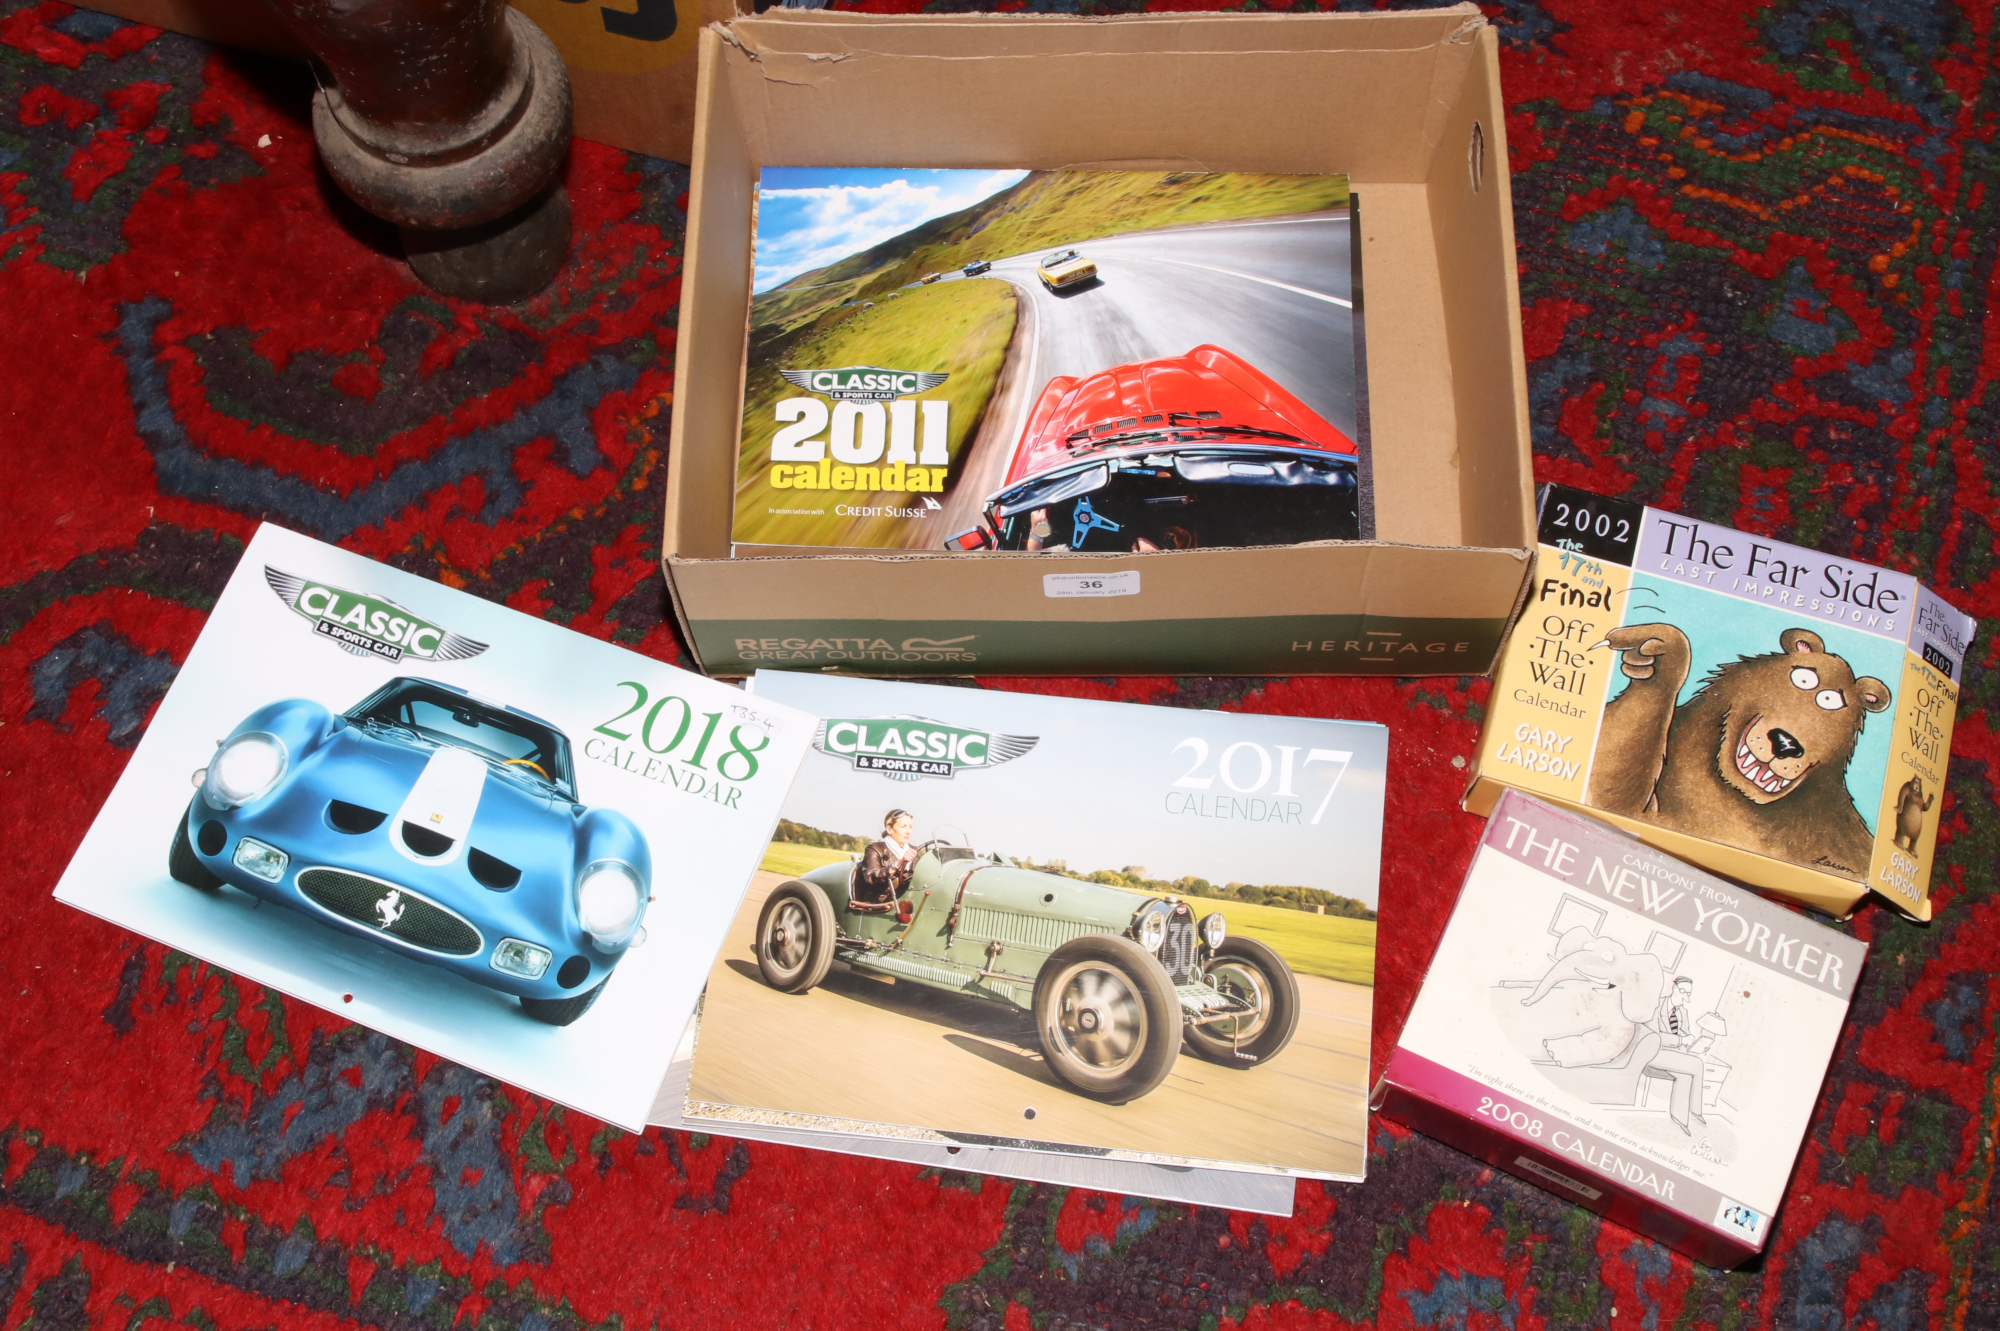 Ten classic and sports car calendars 2001 -2008 along with two desk calendars The Farside Last